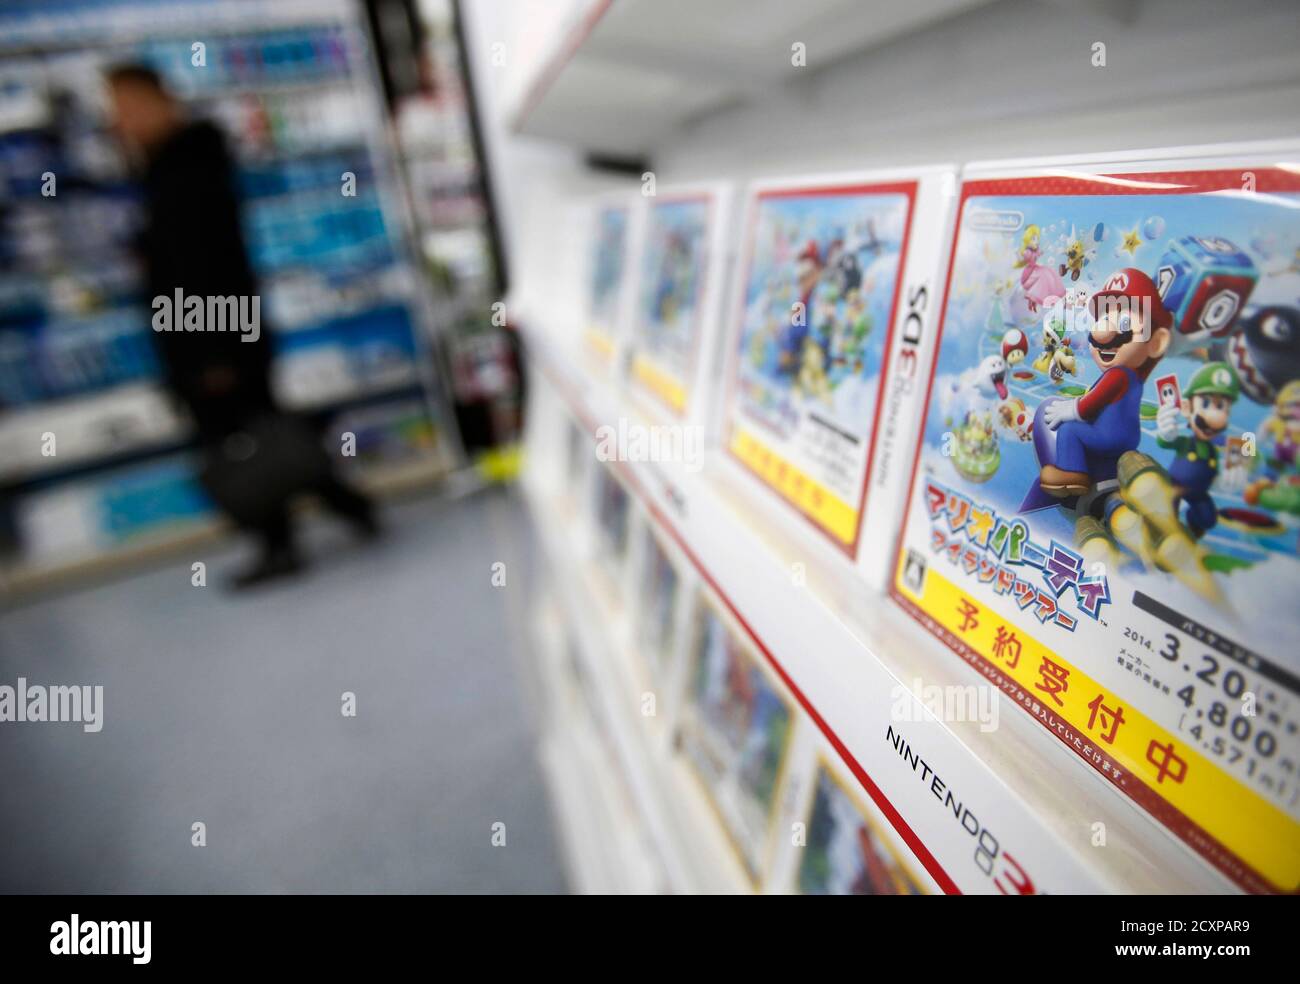 A man looks at items and accessories for Nintendo Co's Wii U game consoles,  as its 3DS portable game console software are displayed at an electronics  retail store in Tokyo January 20,